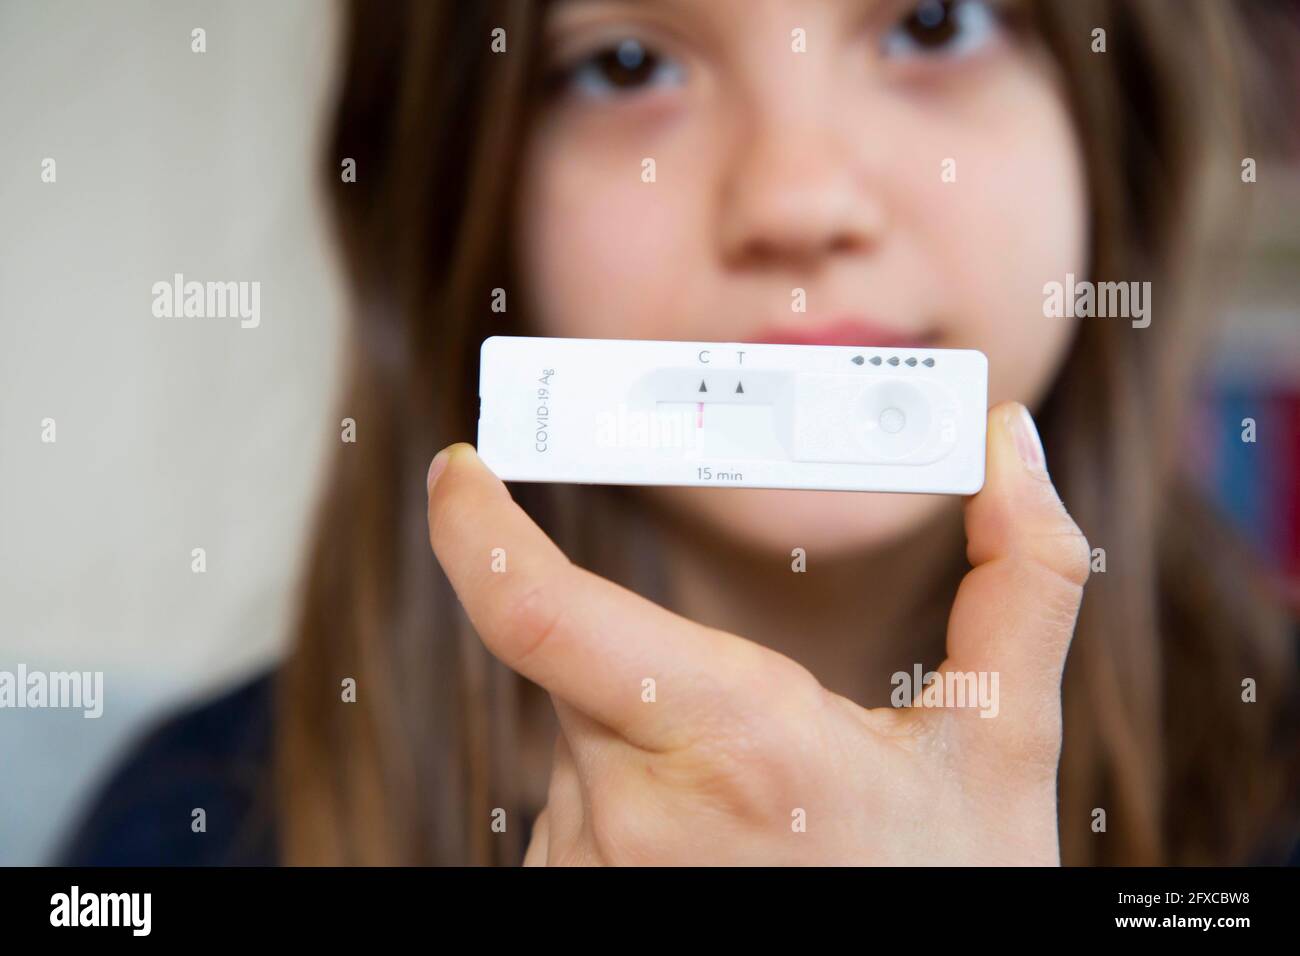 Girl holding rapid diagnostic test at home showing negative result Stock Photo